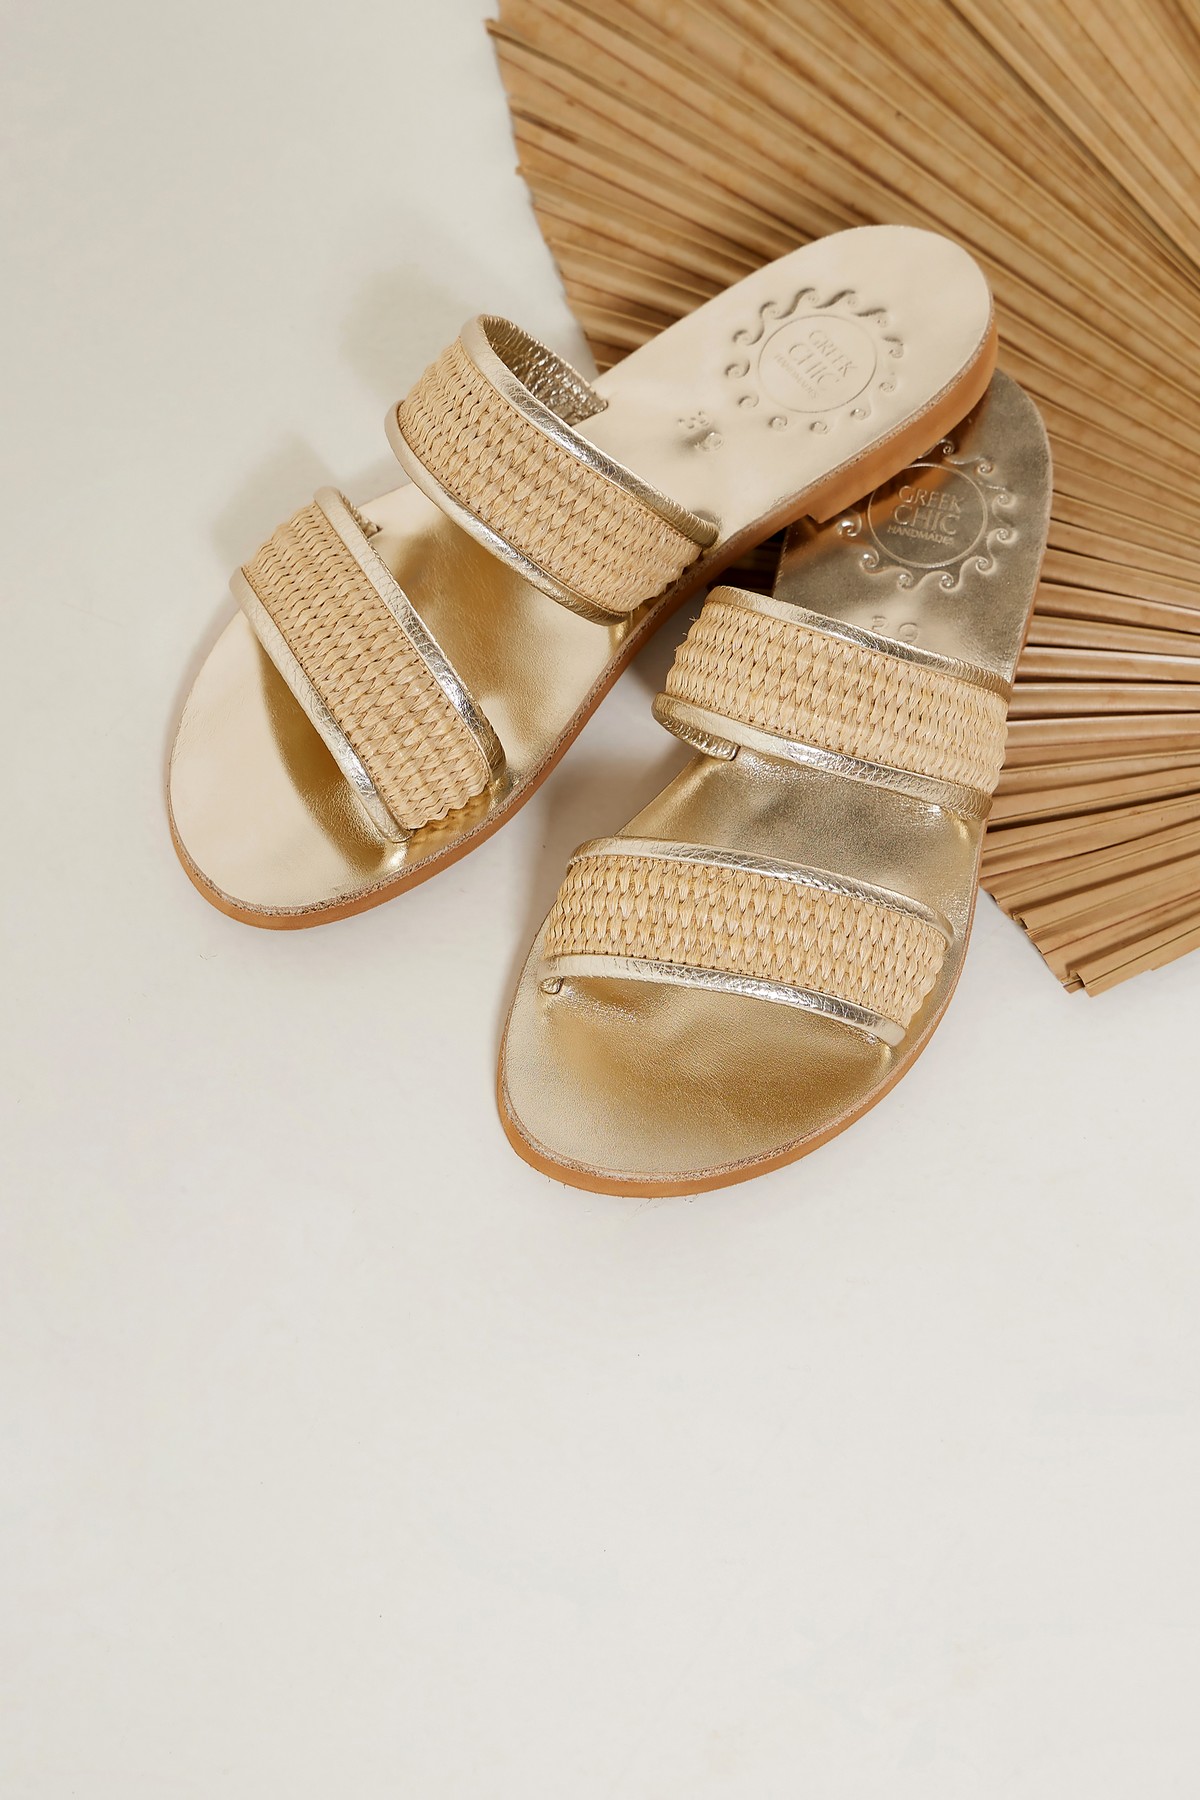 Gold leather sandals with straw